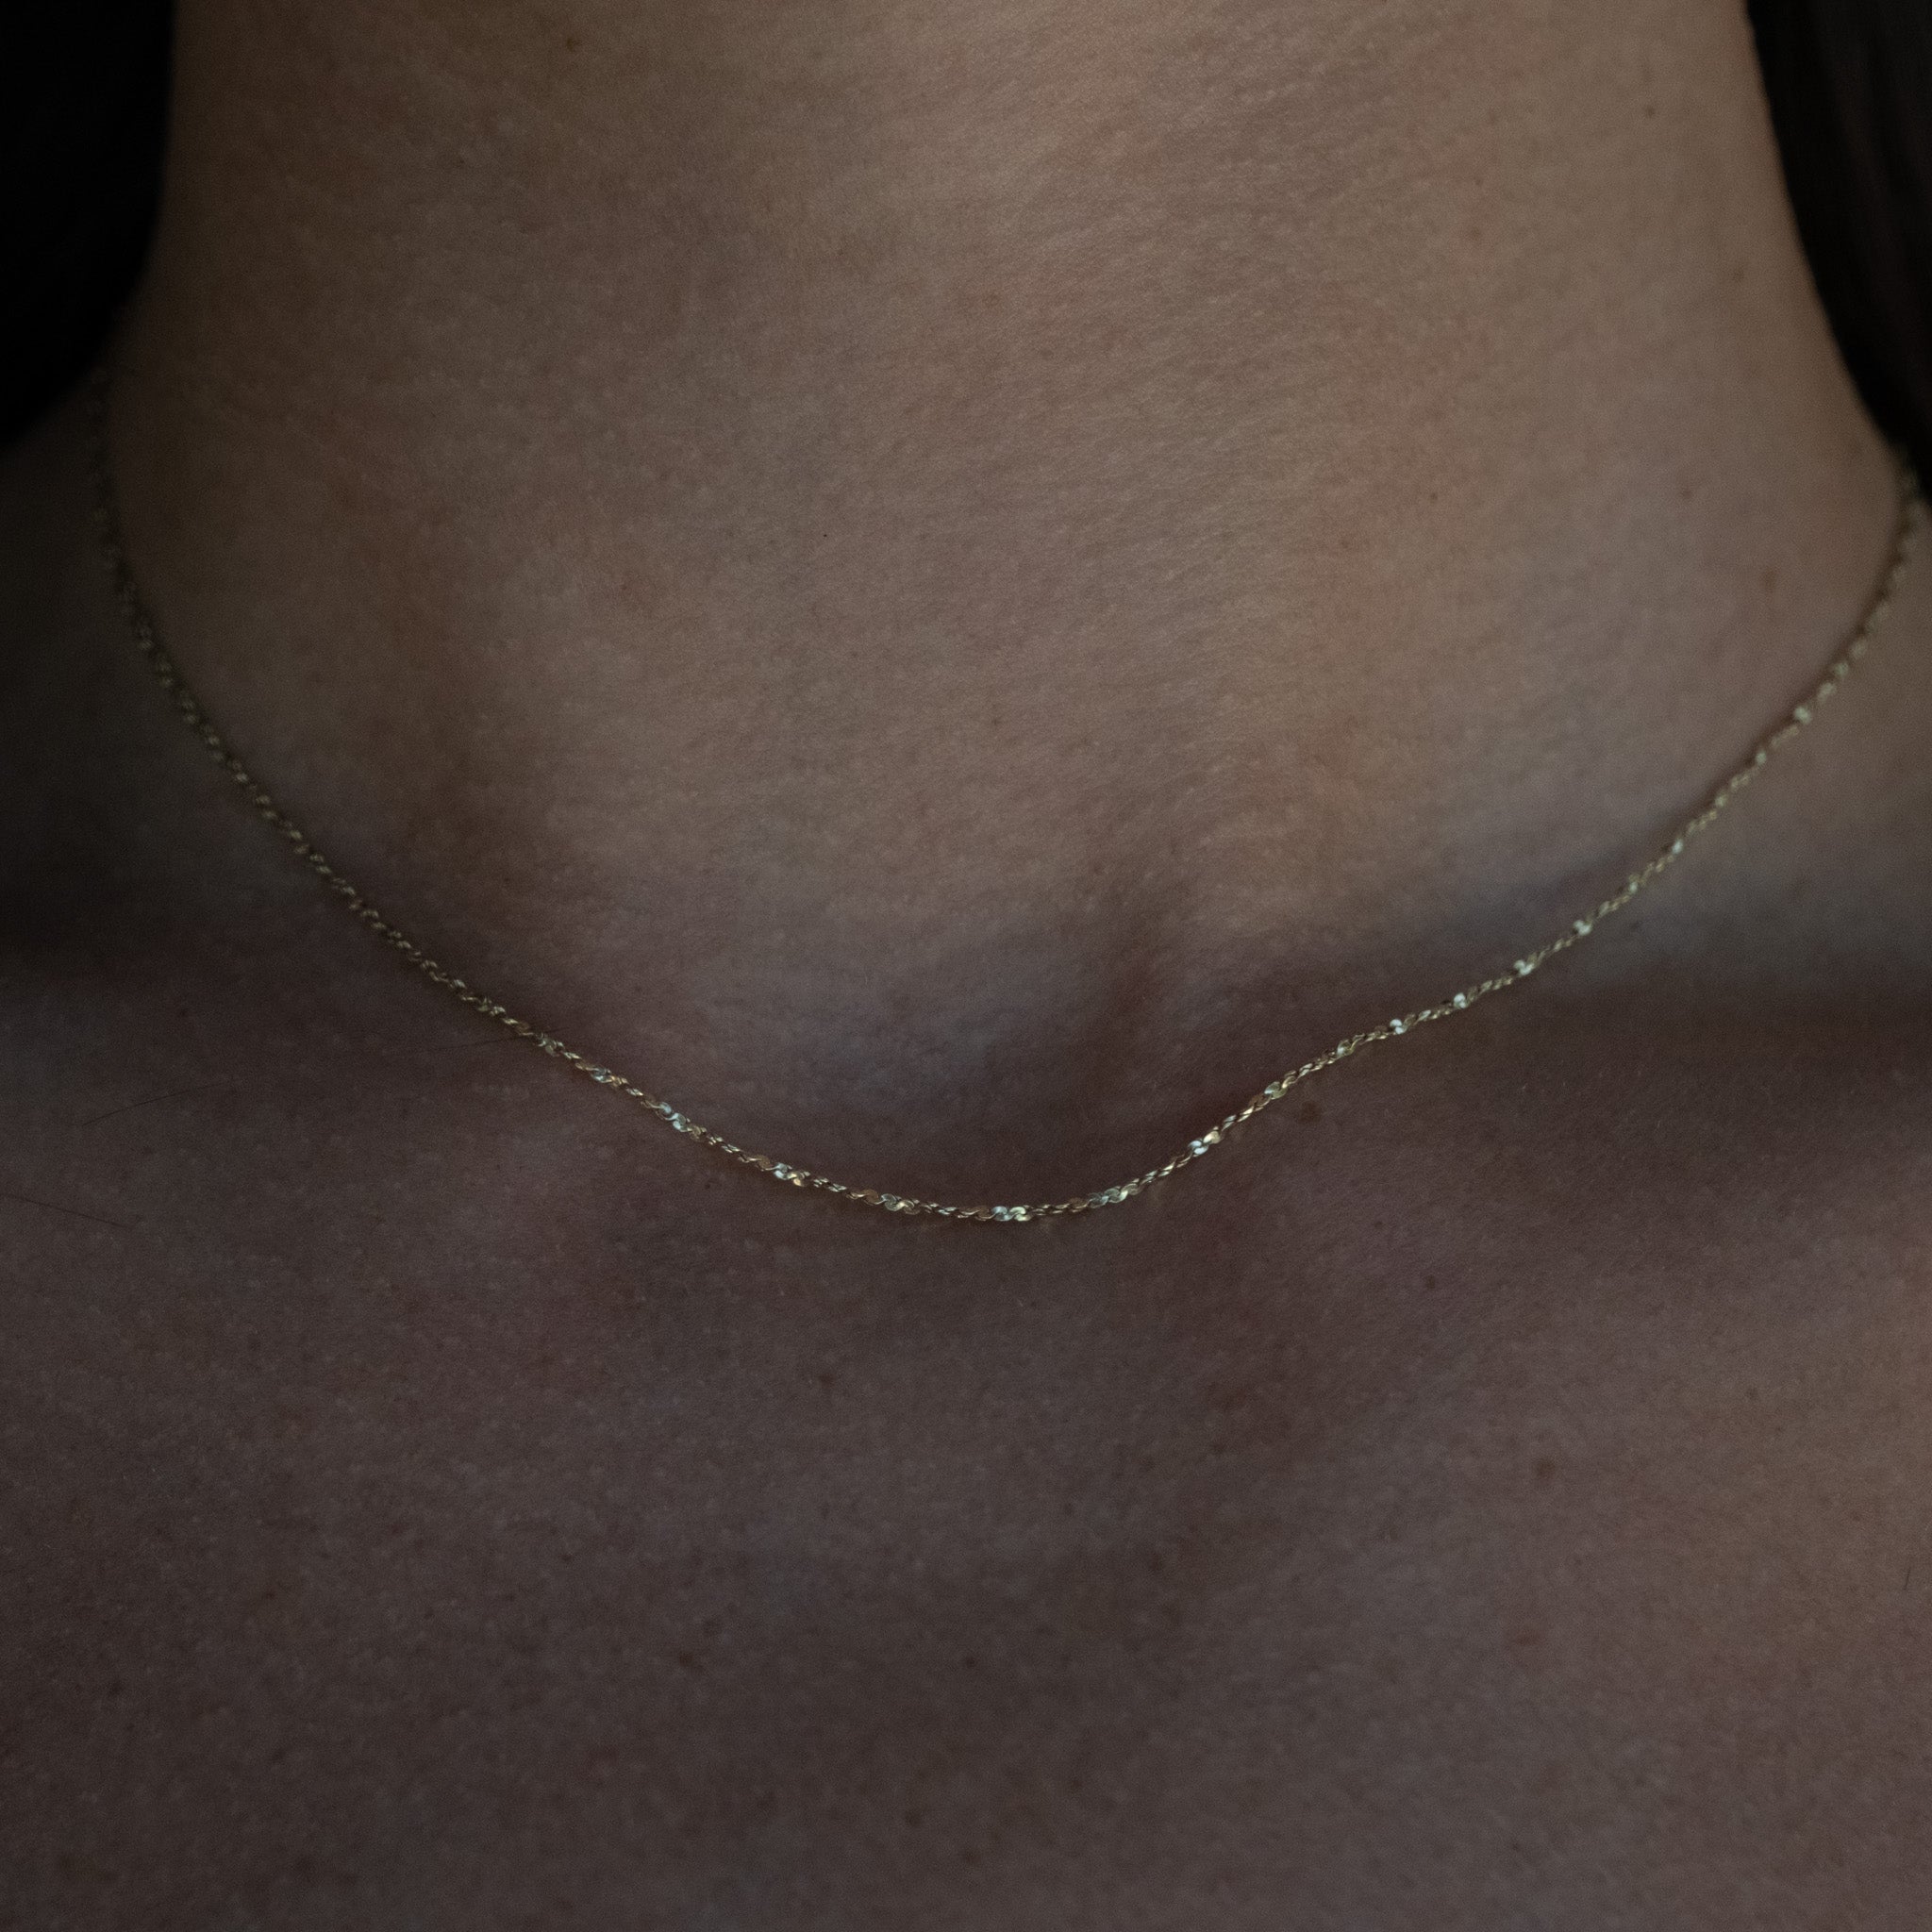 A close up of a person wearing the Aiden Jae Starshine Chain Necklace.